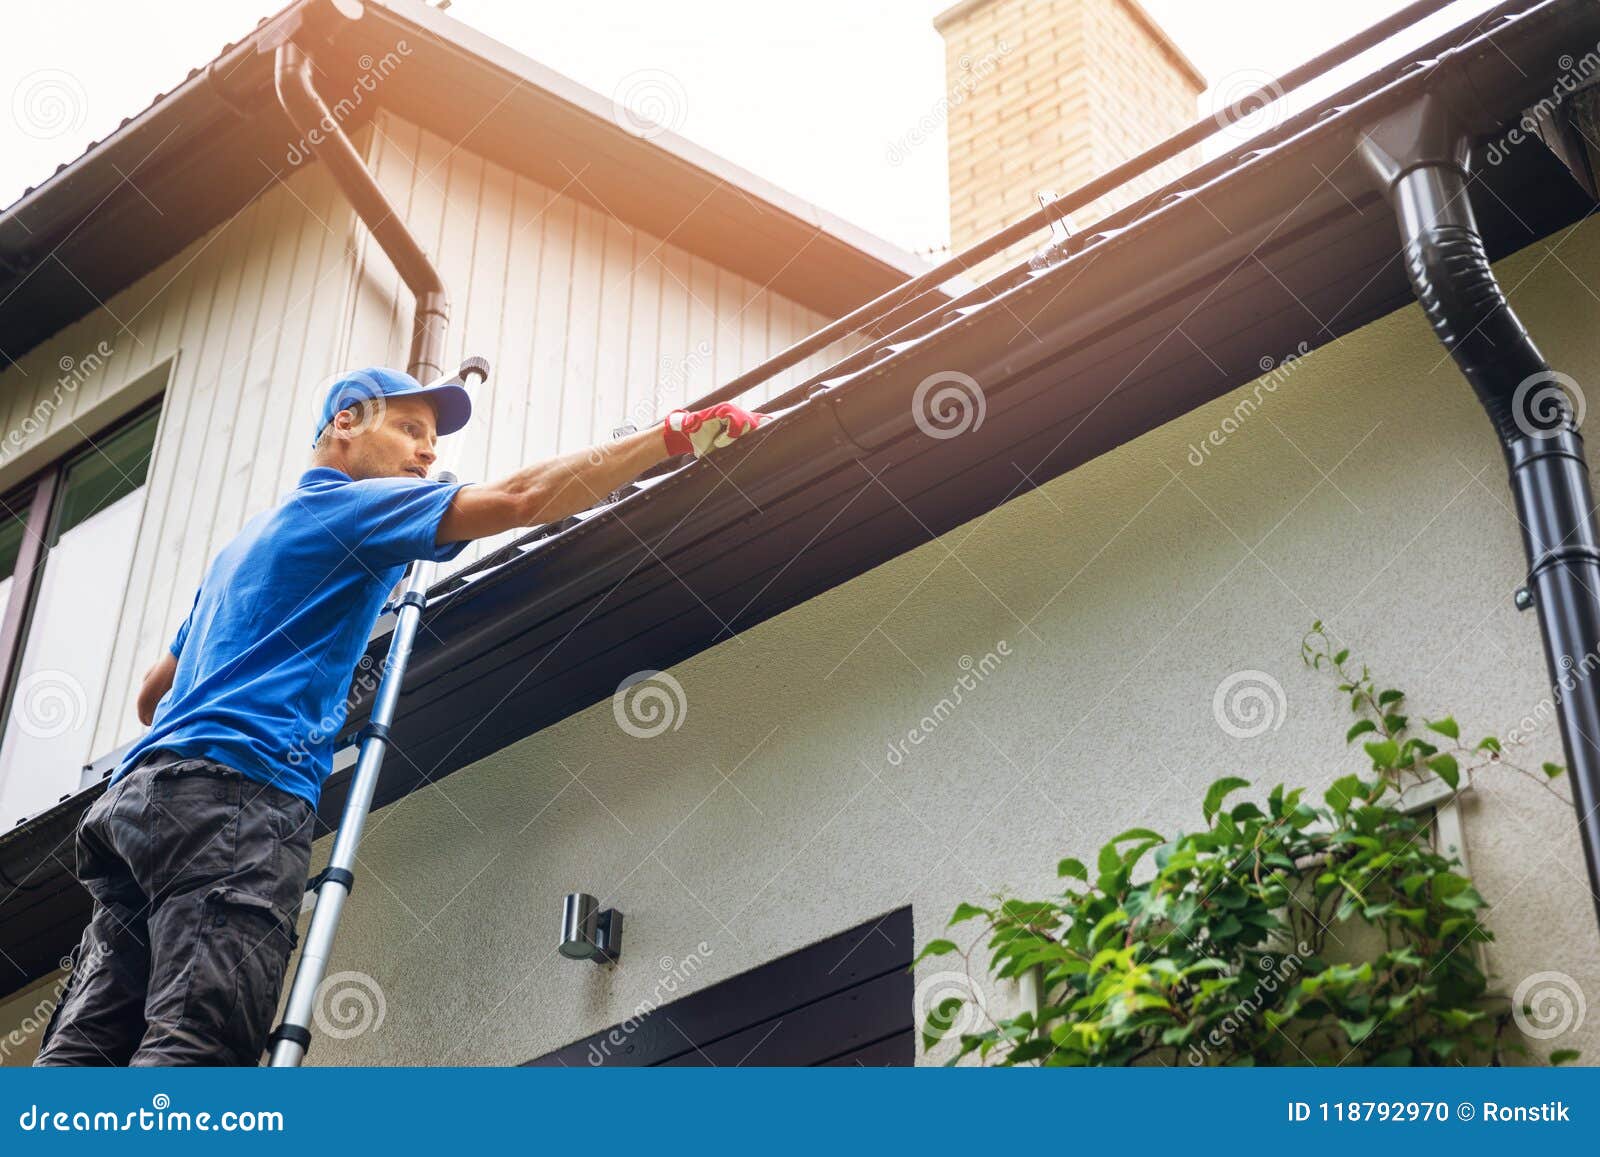 man on ladder cleaning house gutter